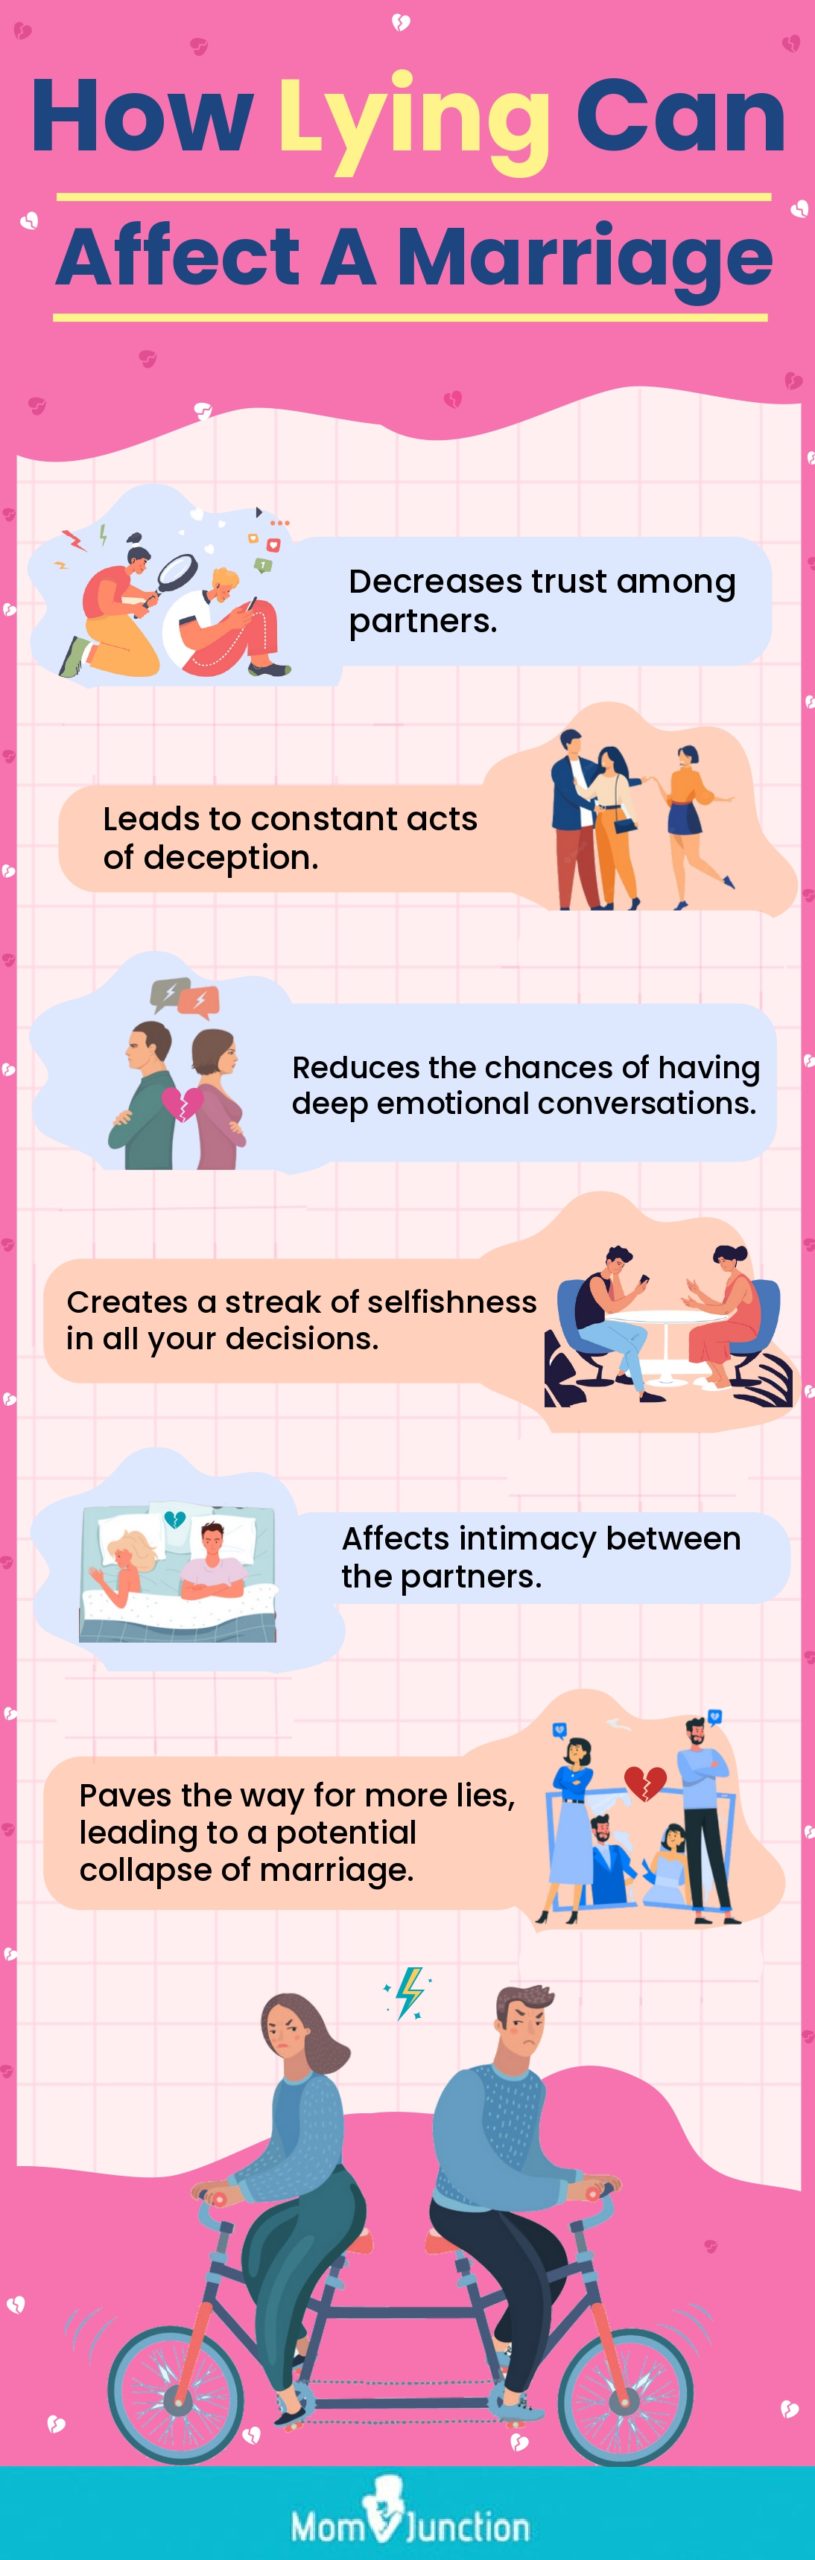 effects of a lying spouse on a marriage (infographic)